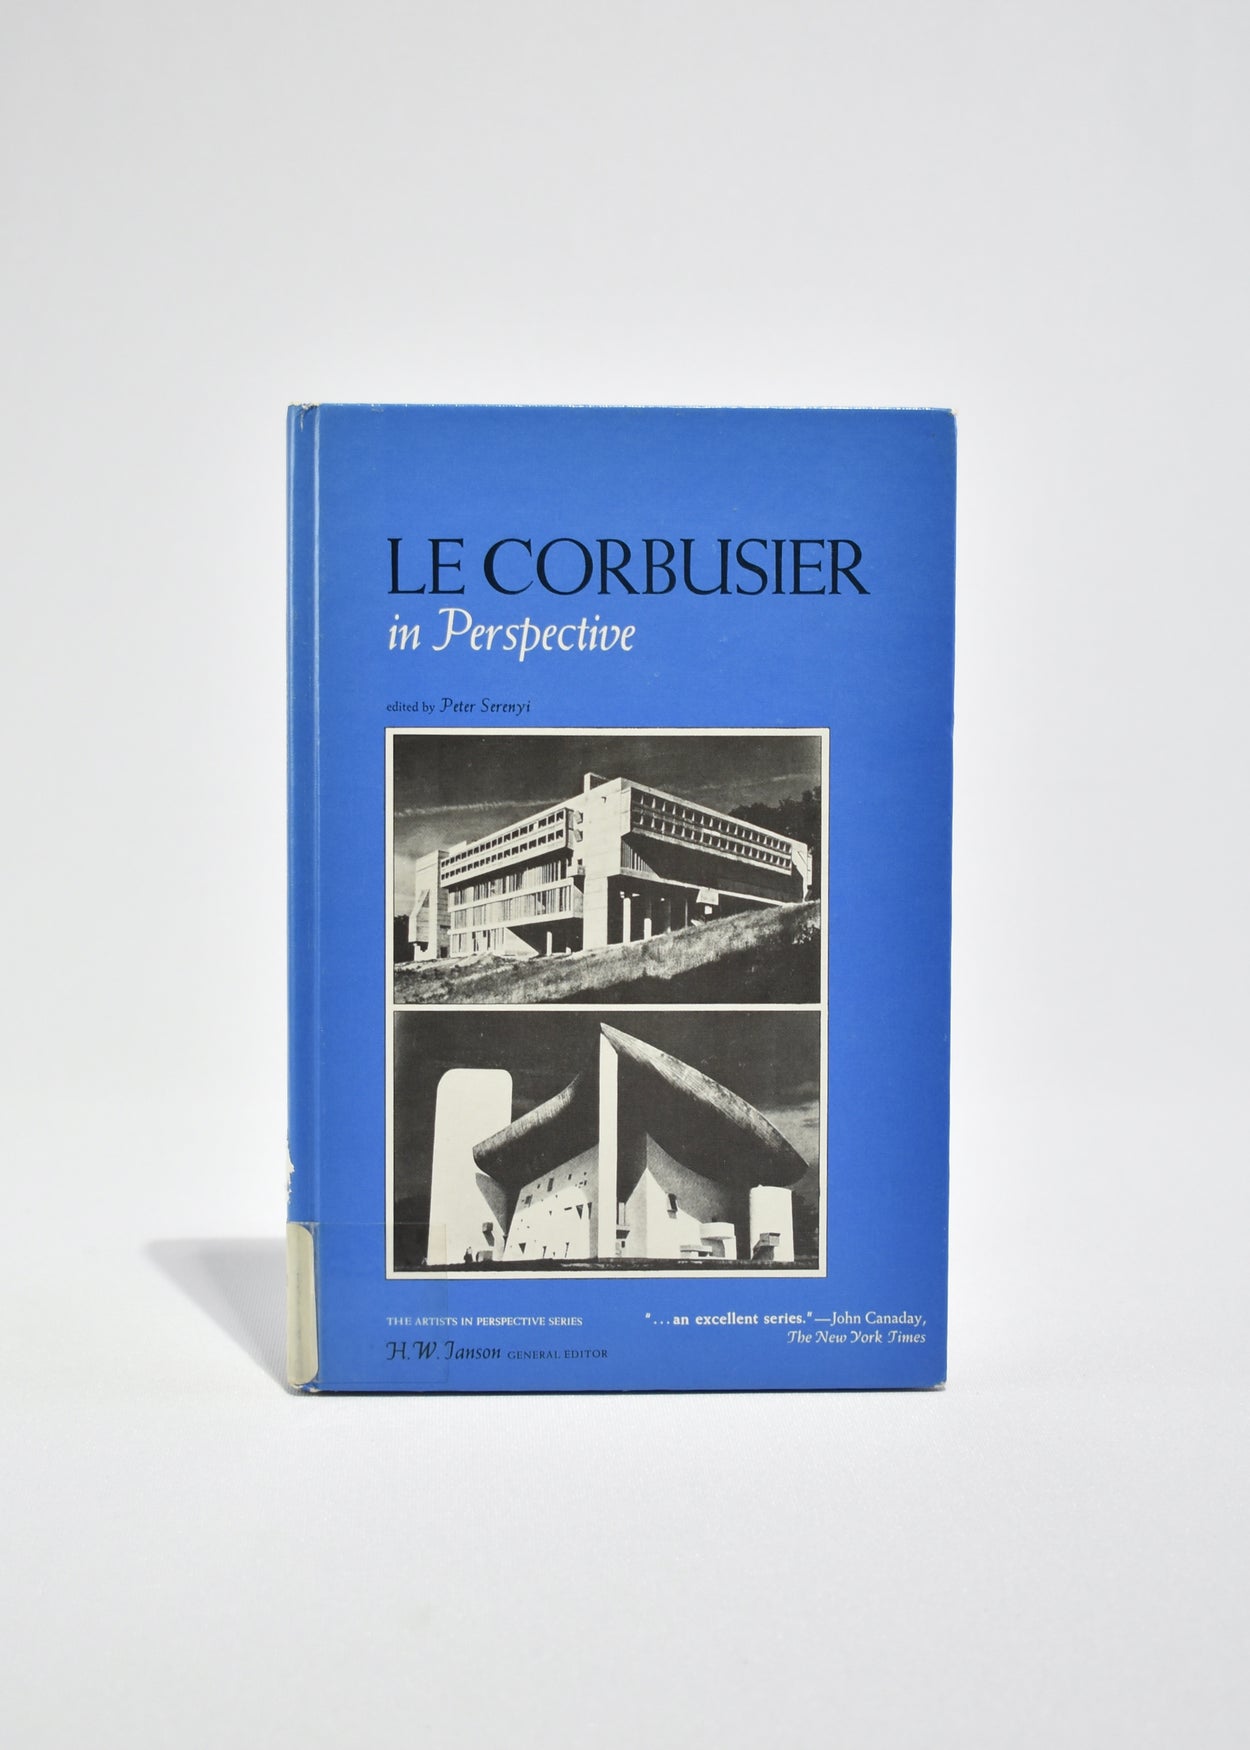 Le Corbusier in Perspective